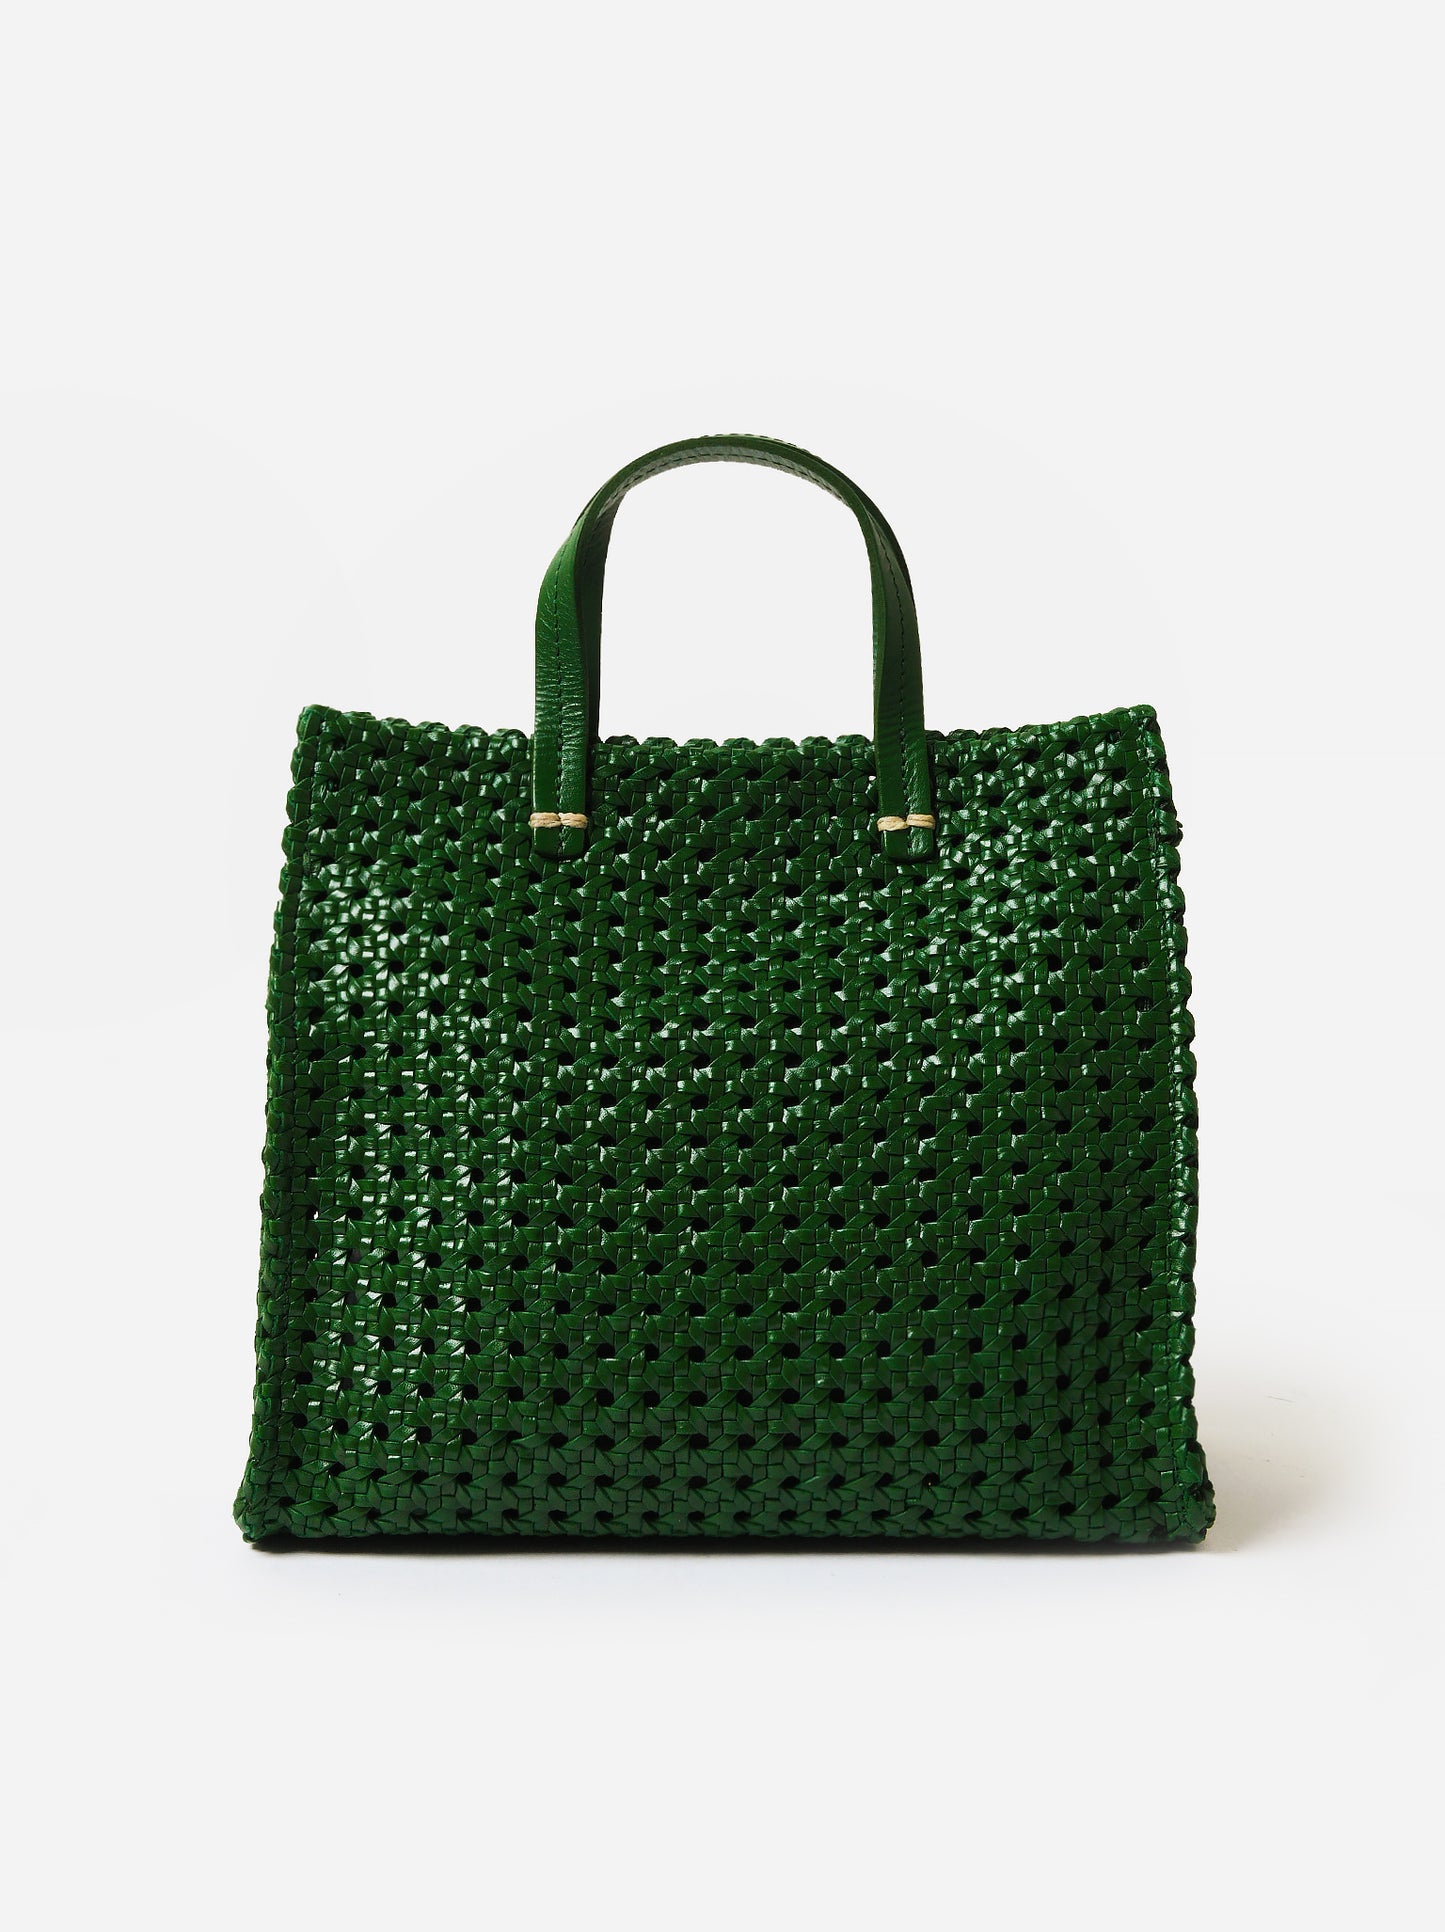 Bateau Weaved Tote by Clare V. for $15